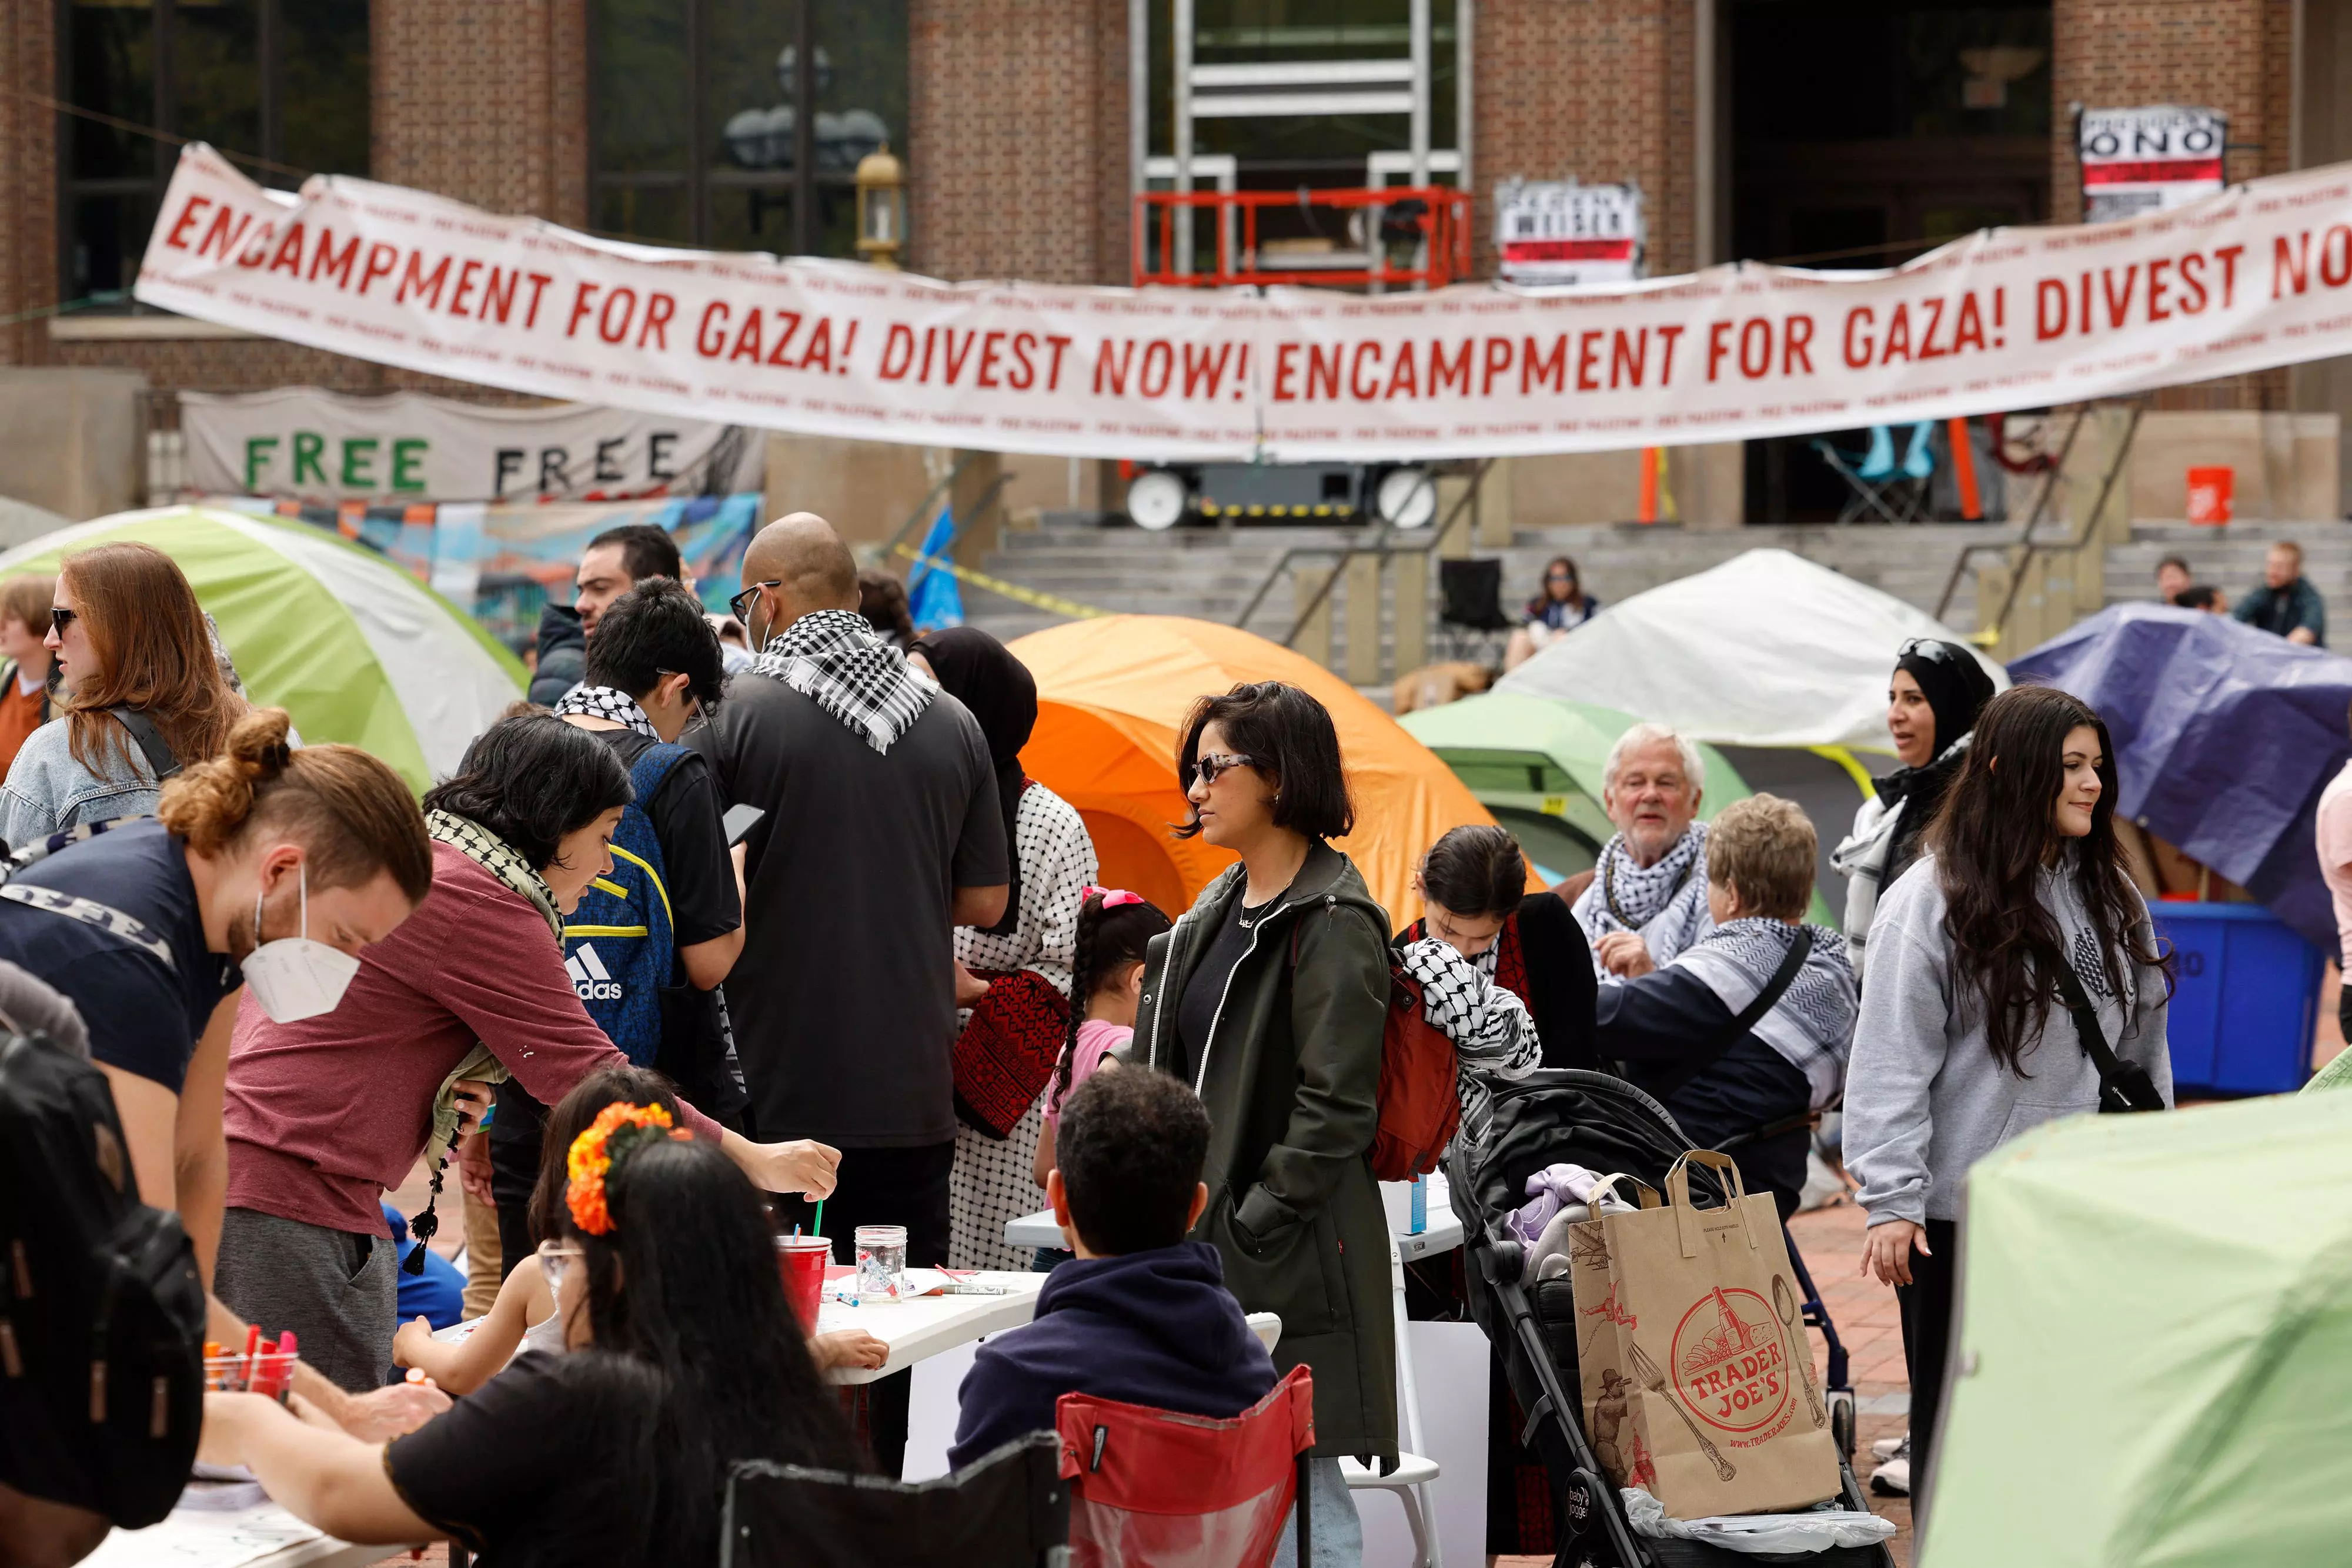 US campus crackdowns lead to over 200 arrests amid pro-Palestine protests